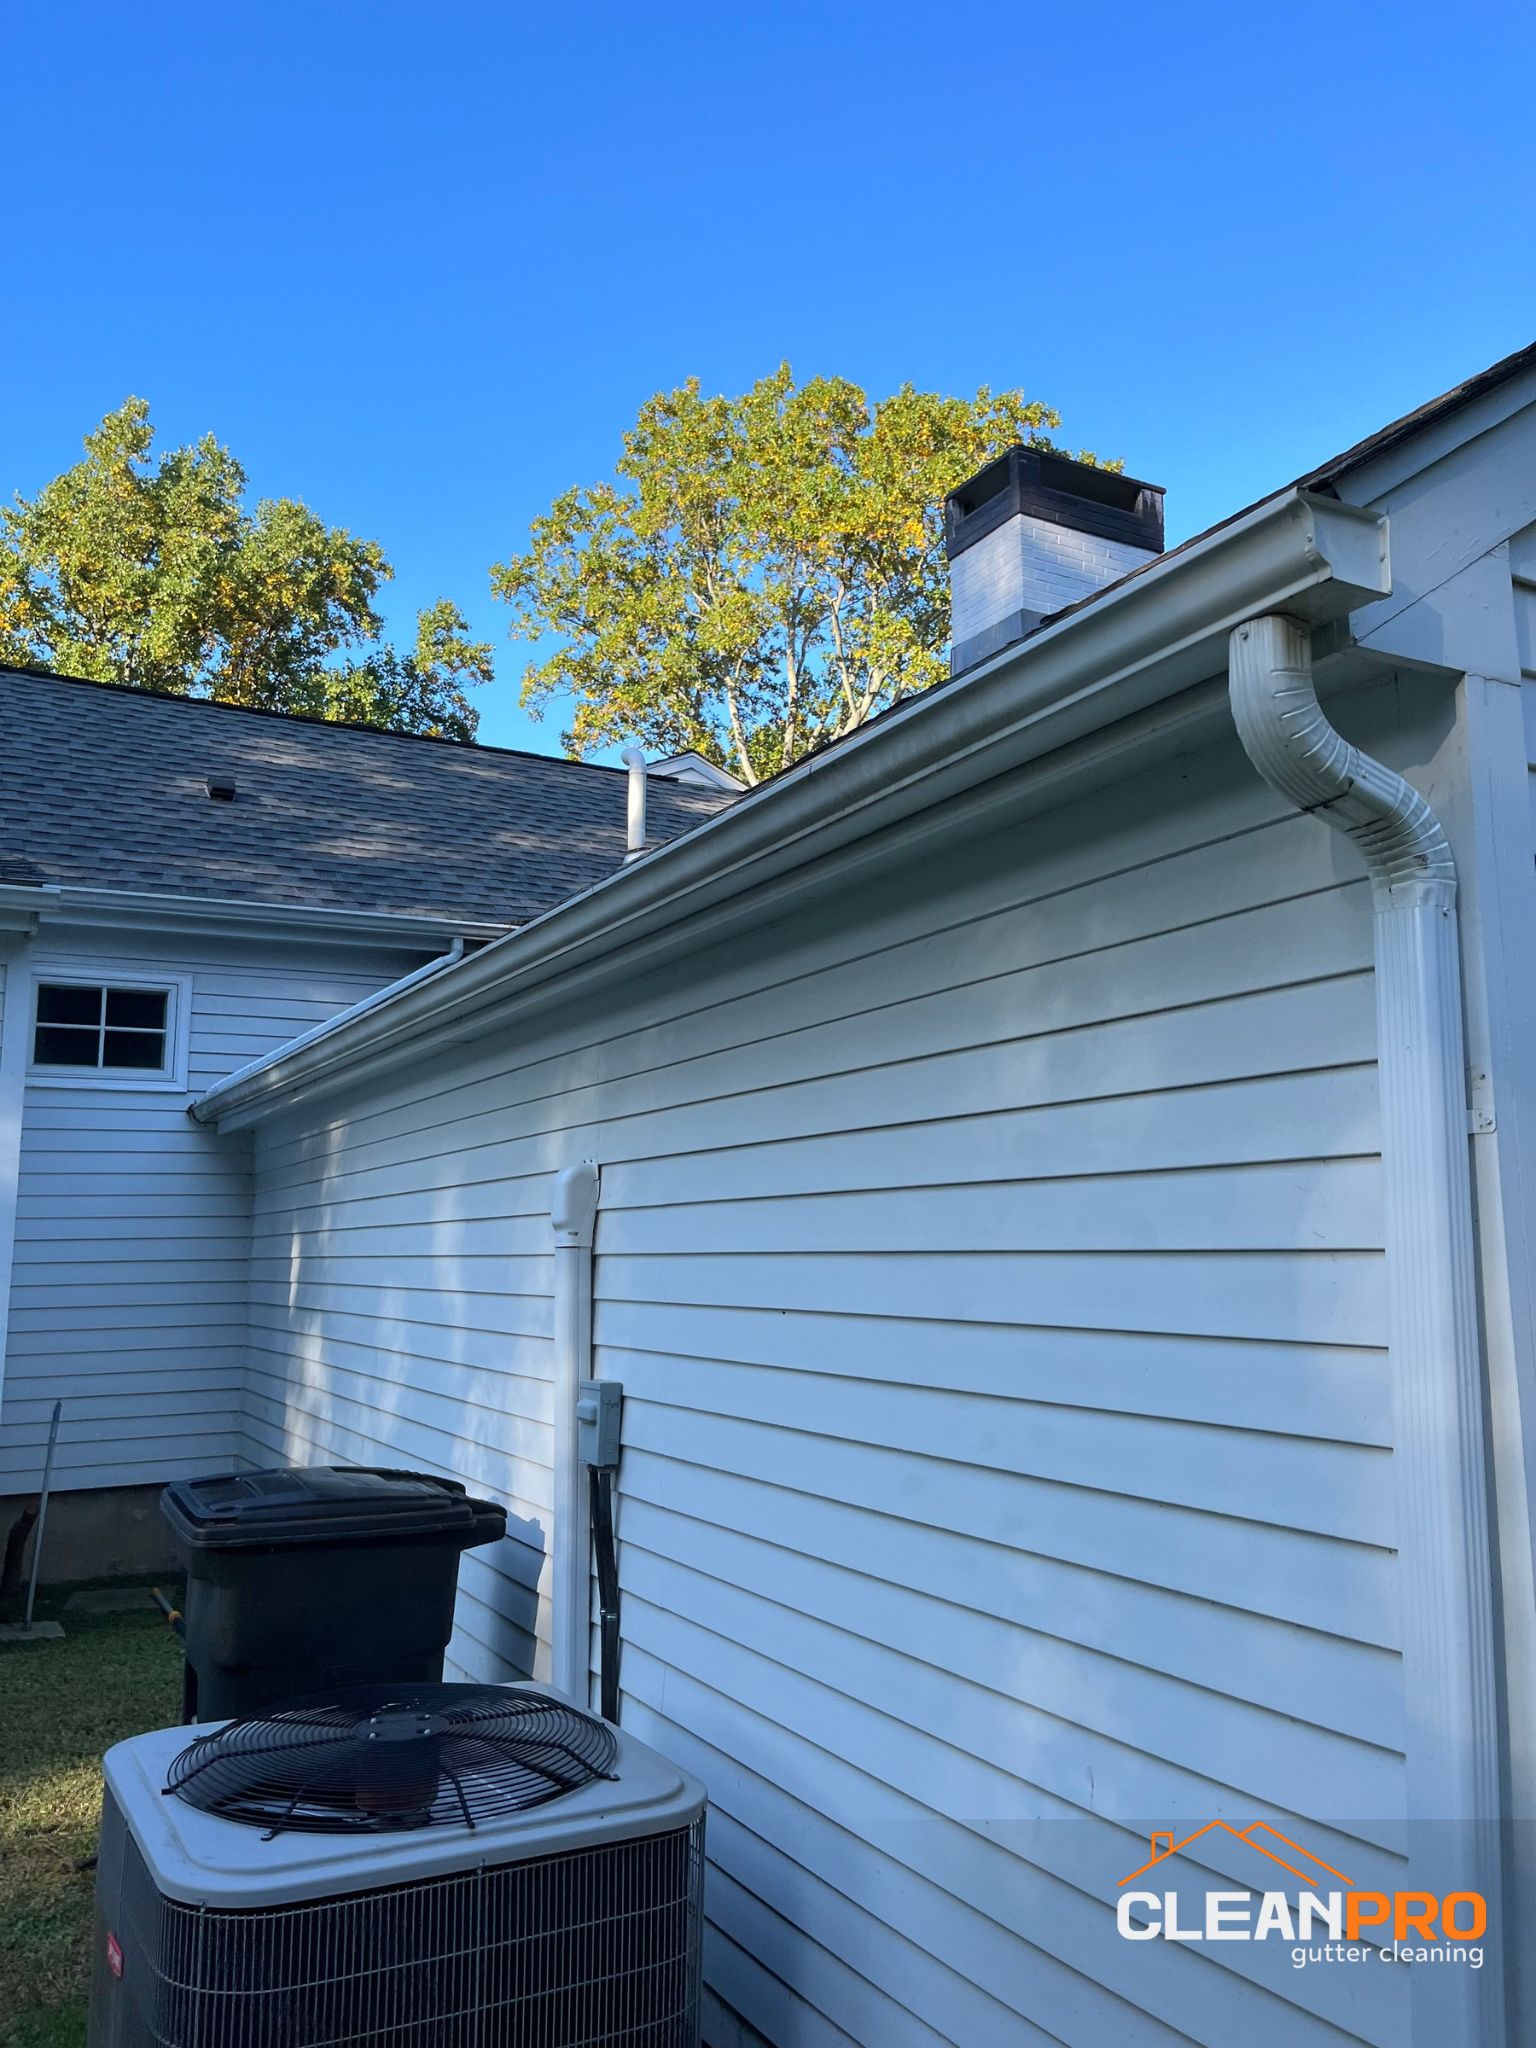 Local Gutter Cleaning in Greenville